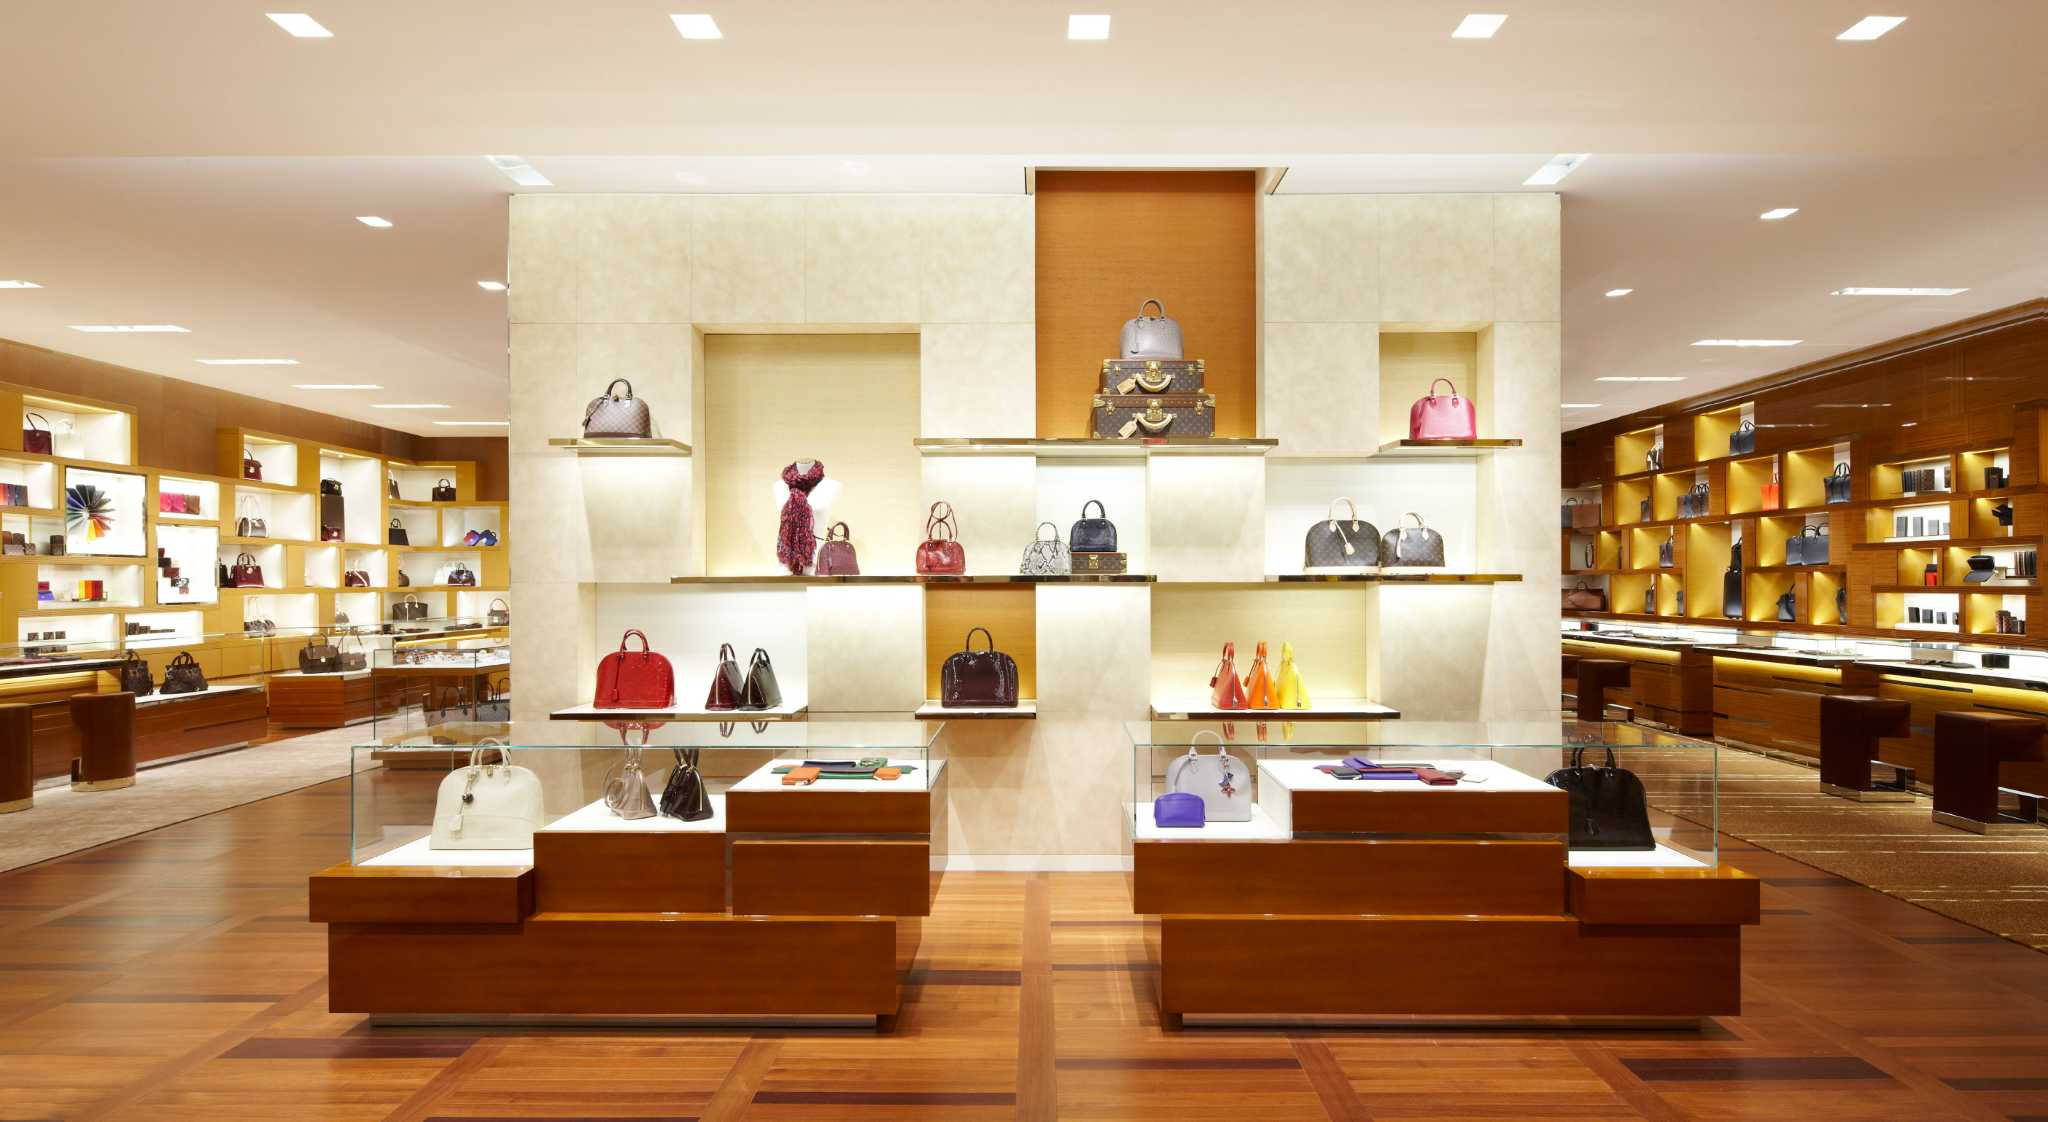 Louis Vuitton expands in the Galleria - www.waterandnature.org